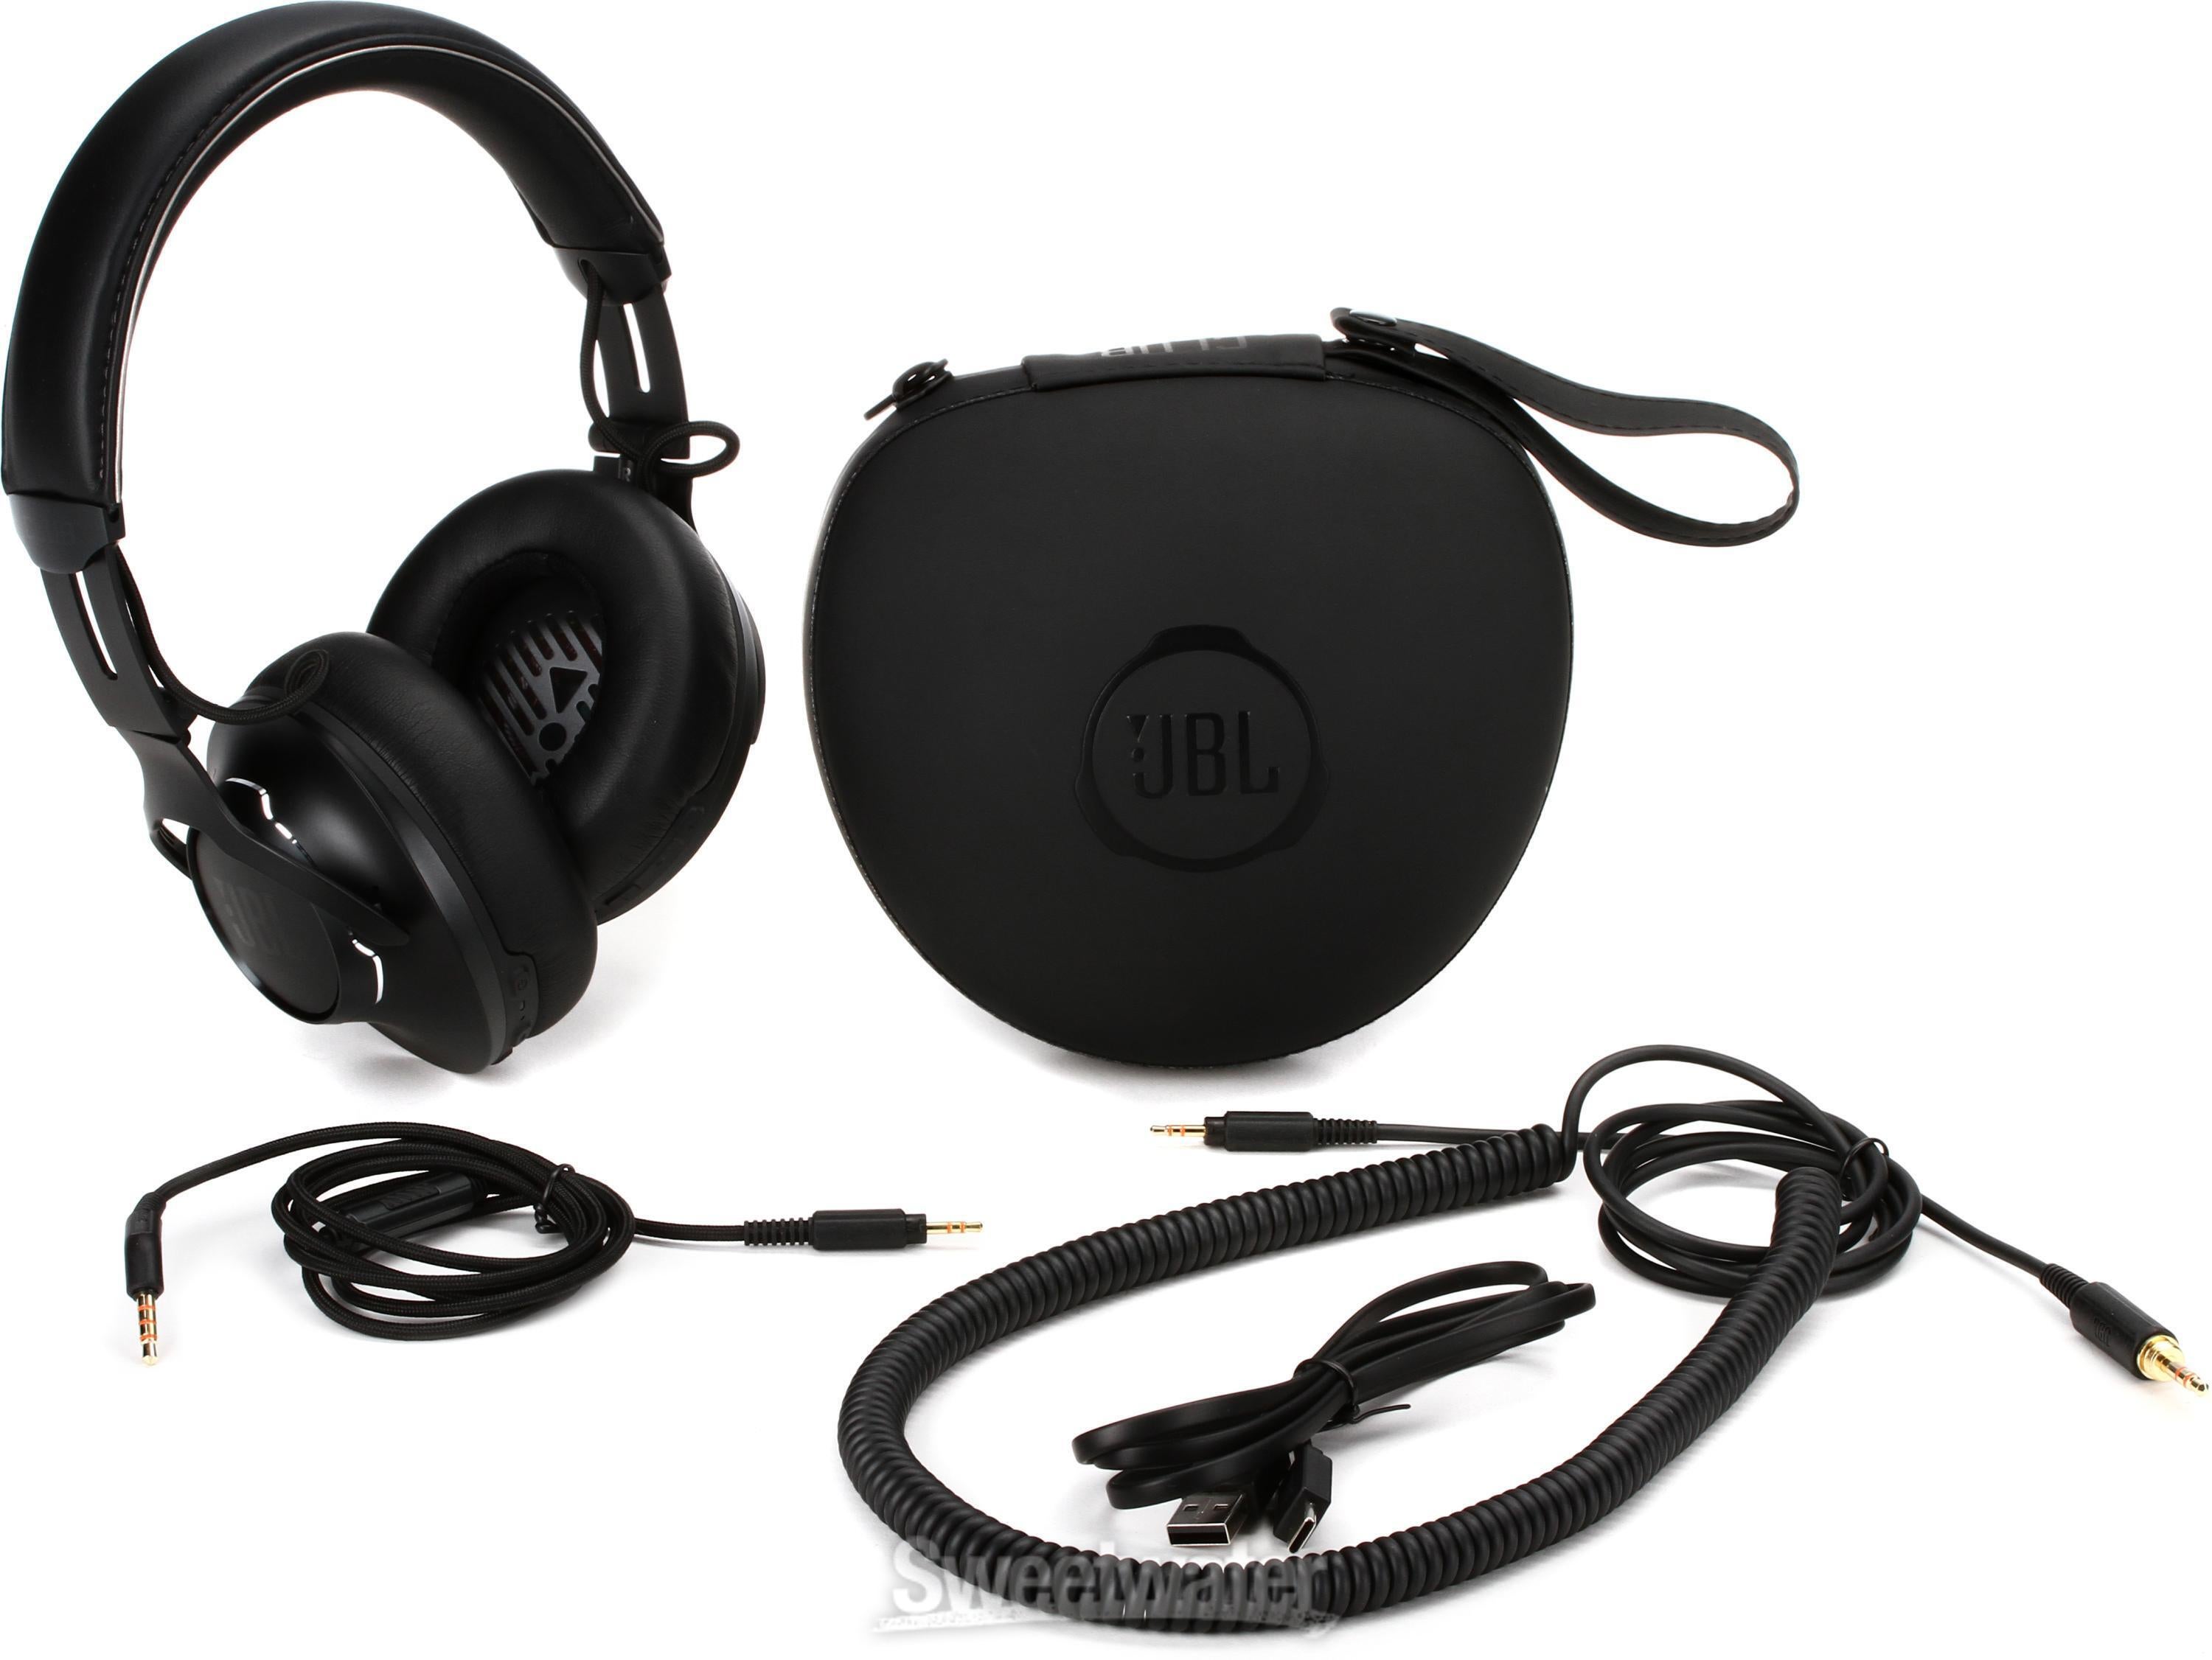 JBL Club One Over-ear Active Noise Canceling Wireless Headphones - Black |  Sweetwater